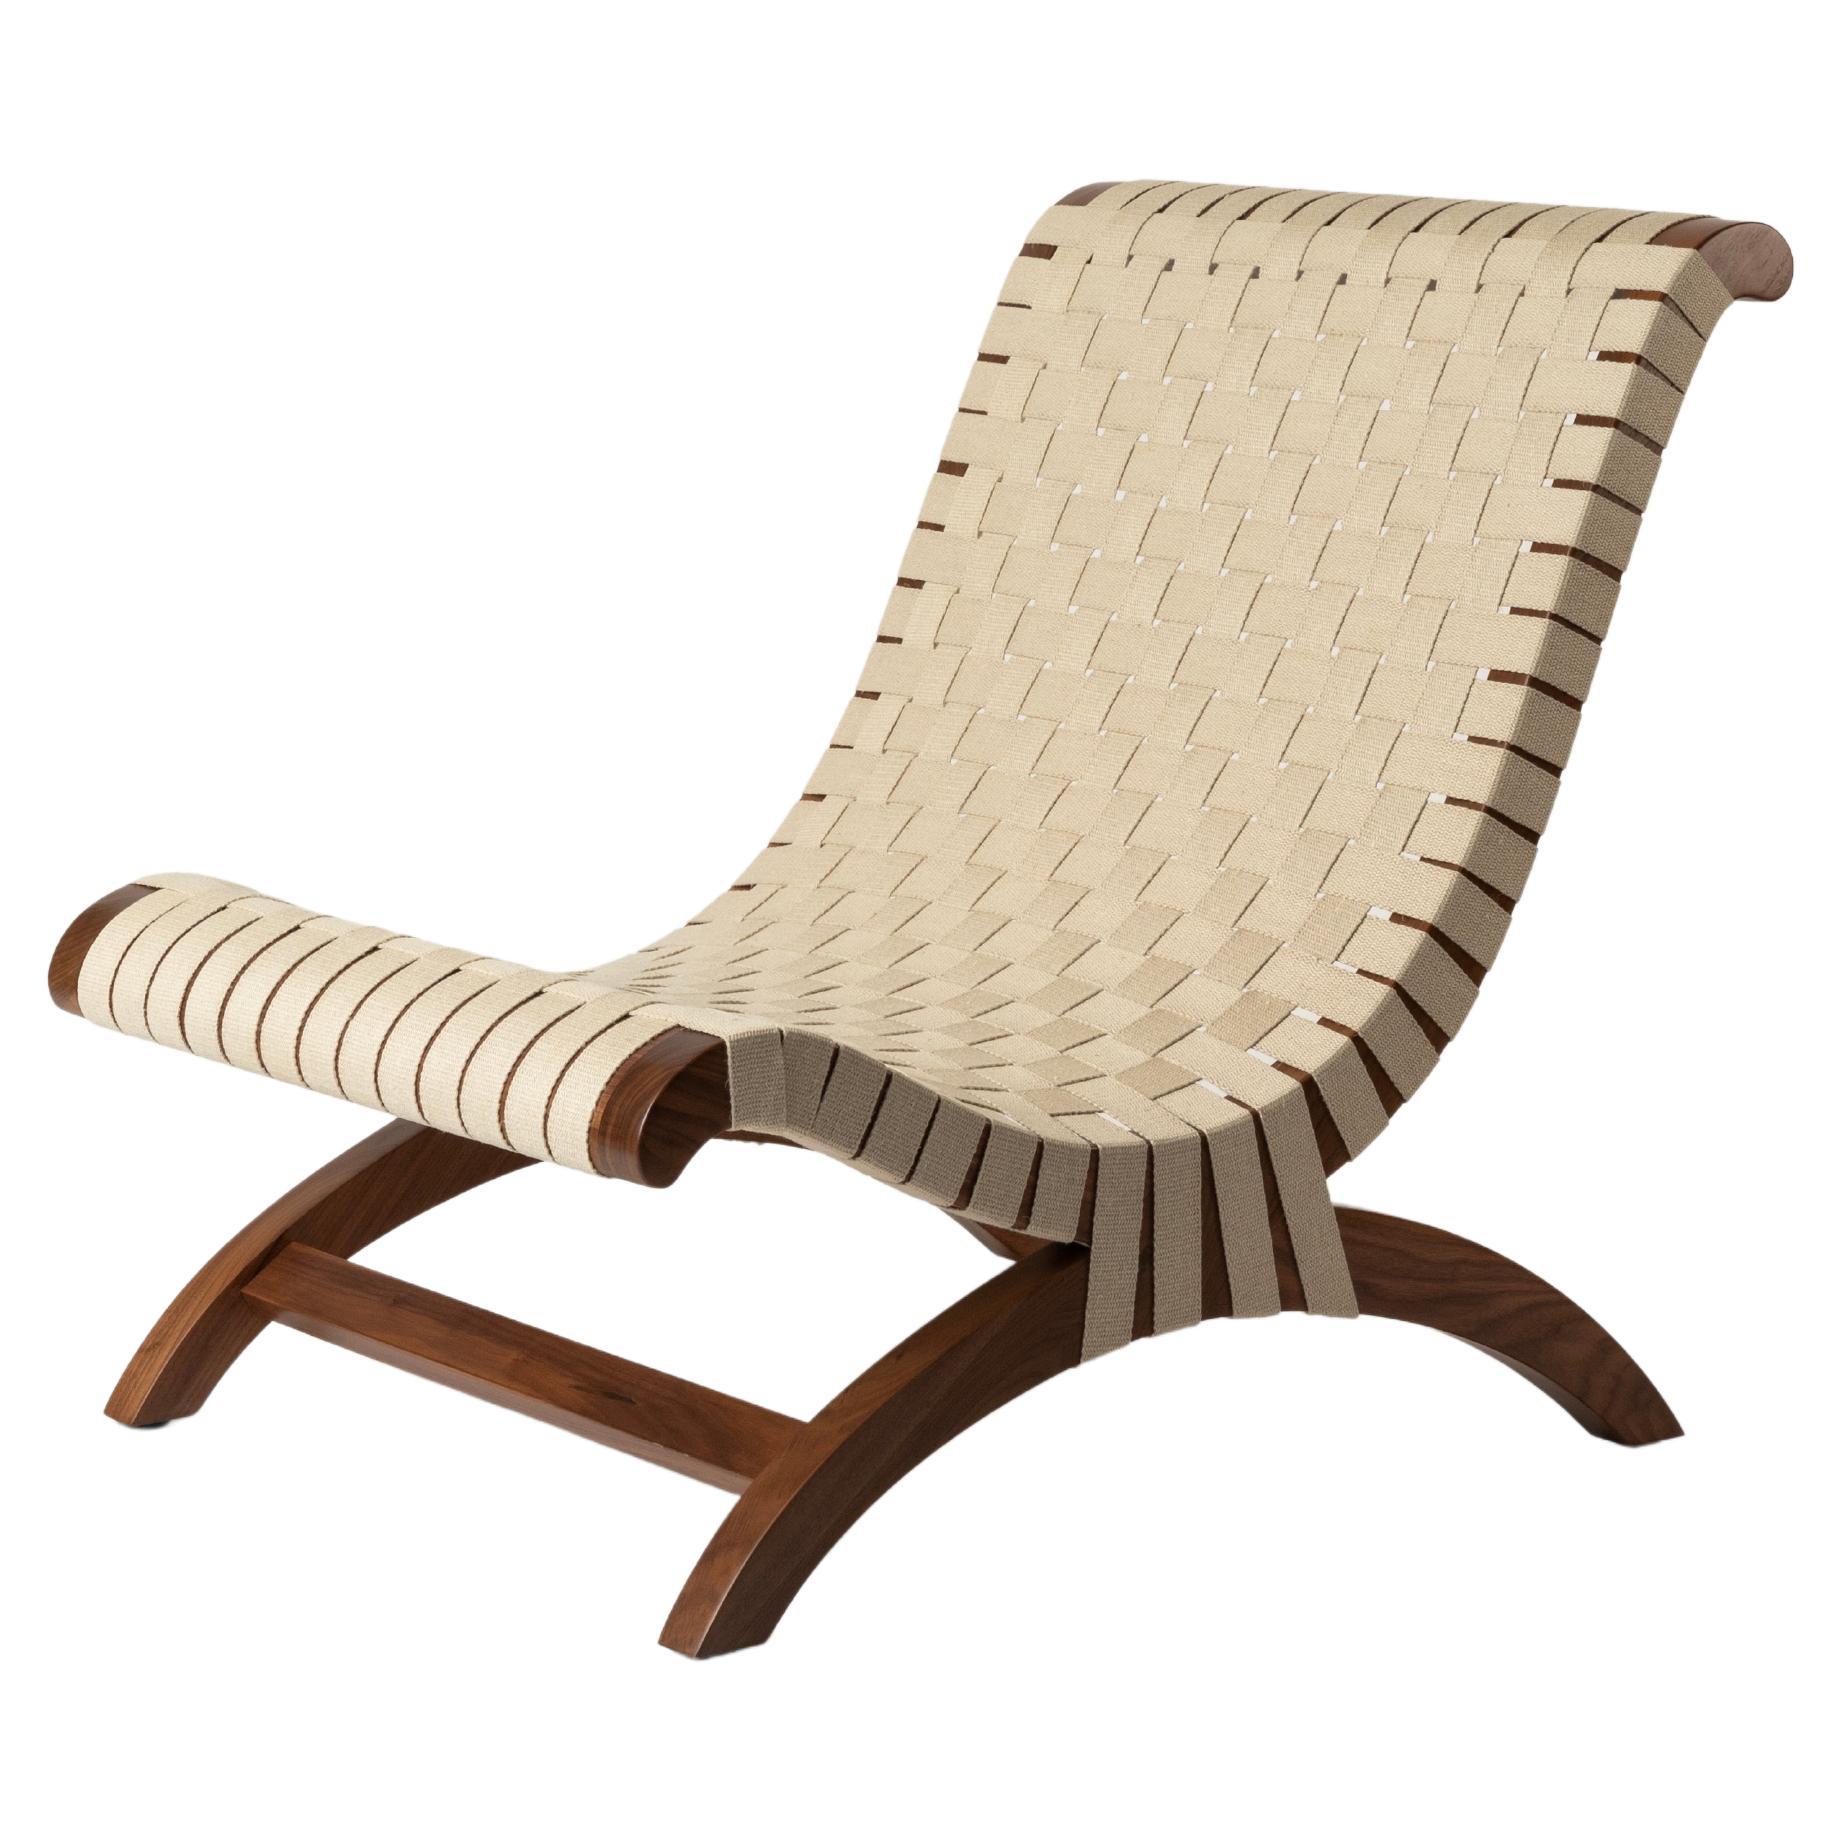 Clara Porset's Mexican Walnut & Hemp Butaque Chair, licensed reedition by Luteca For Sale